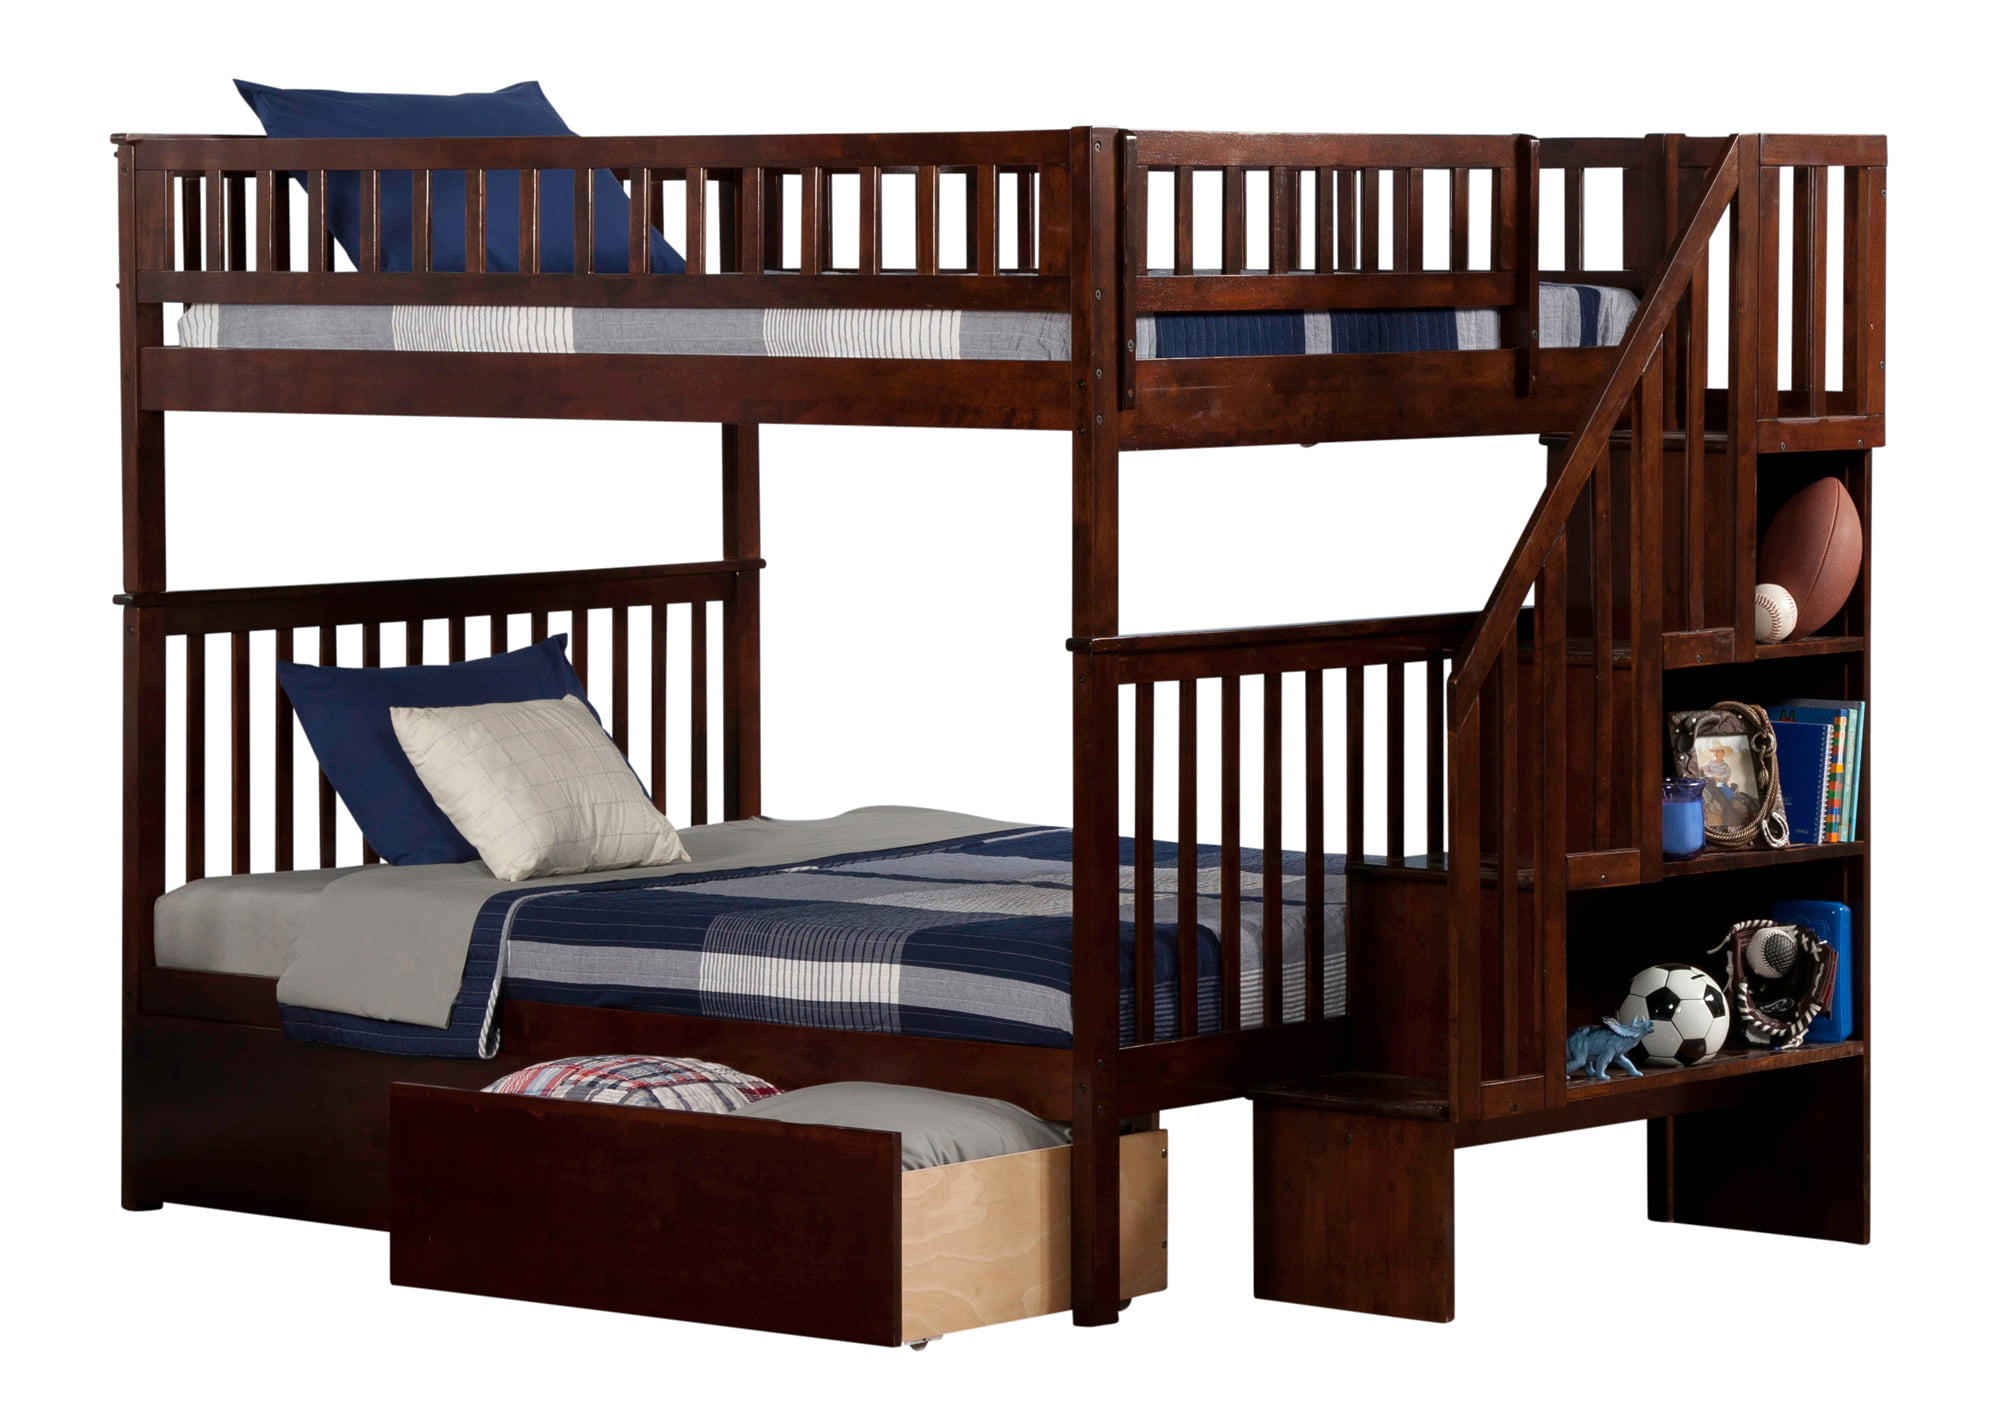 Ab56844 Woodland Staircase Bunk Bed With Urban Bed Drawers, Antique Walnut - Full & Full